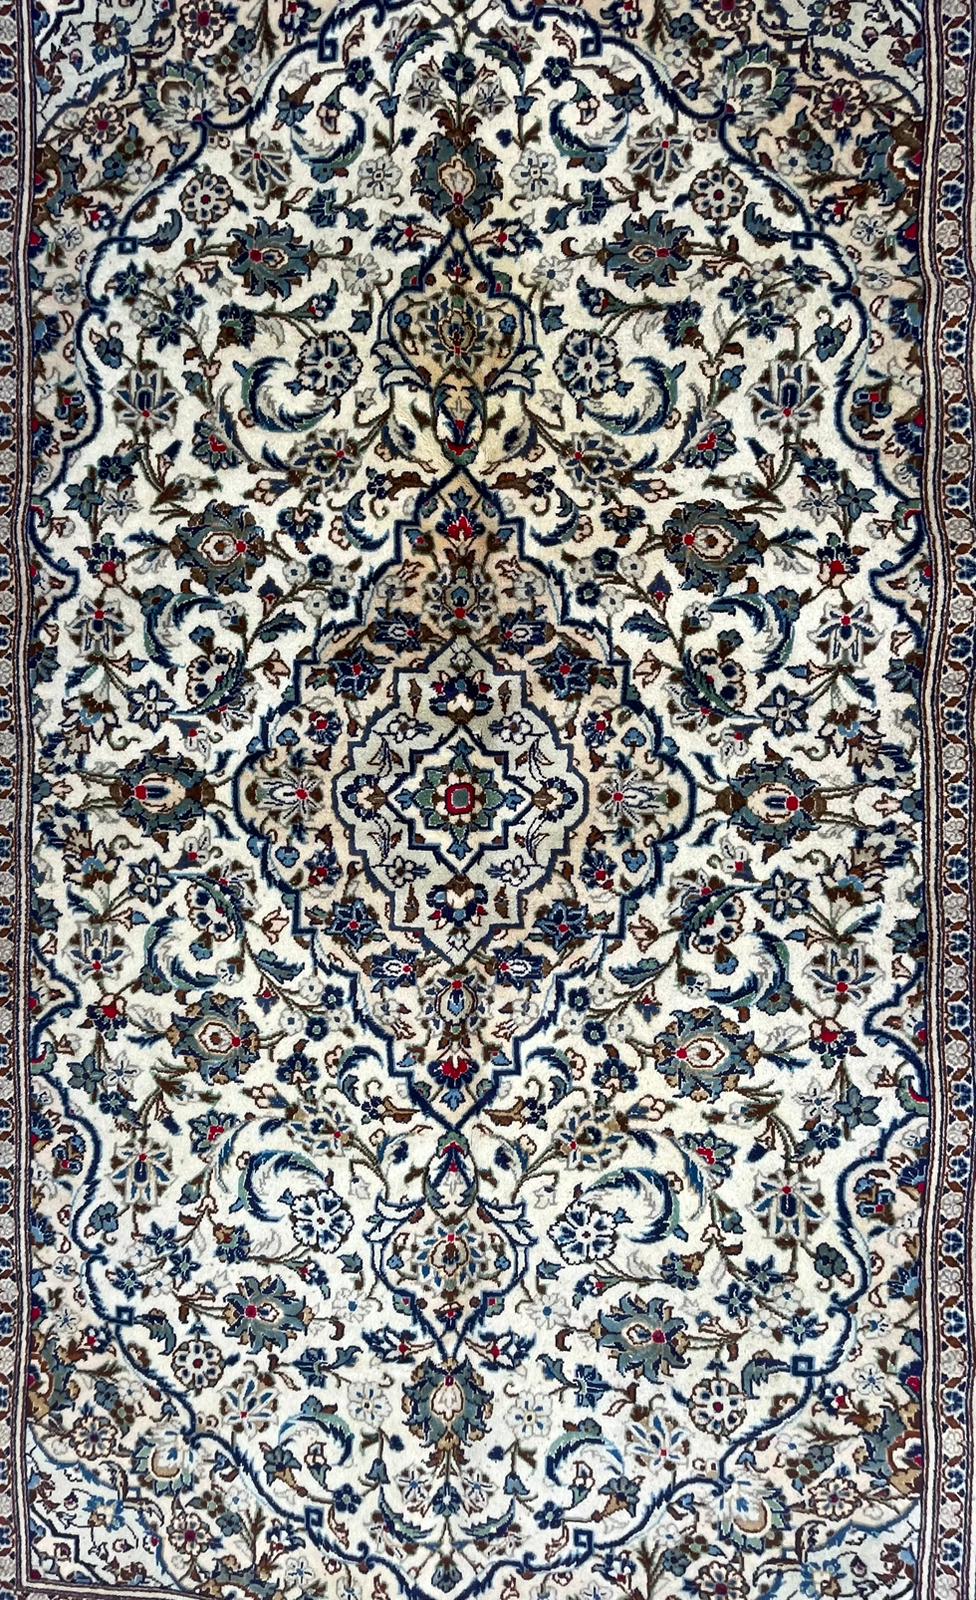 EARLY 20TH CENTURY CENTRAL PERSIAN KASHAN FLOOR CARPET RUG - Image 2 of 5